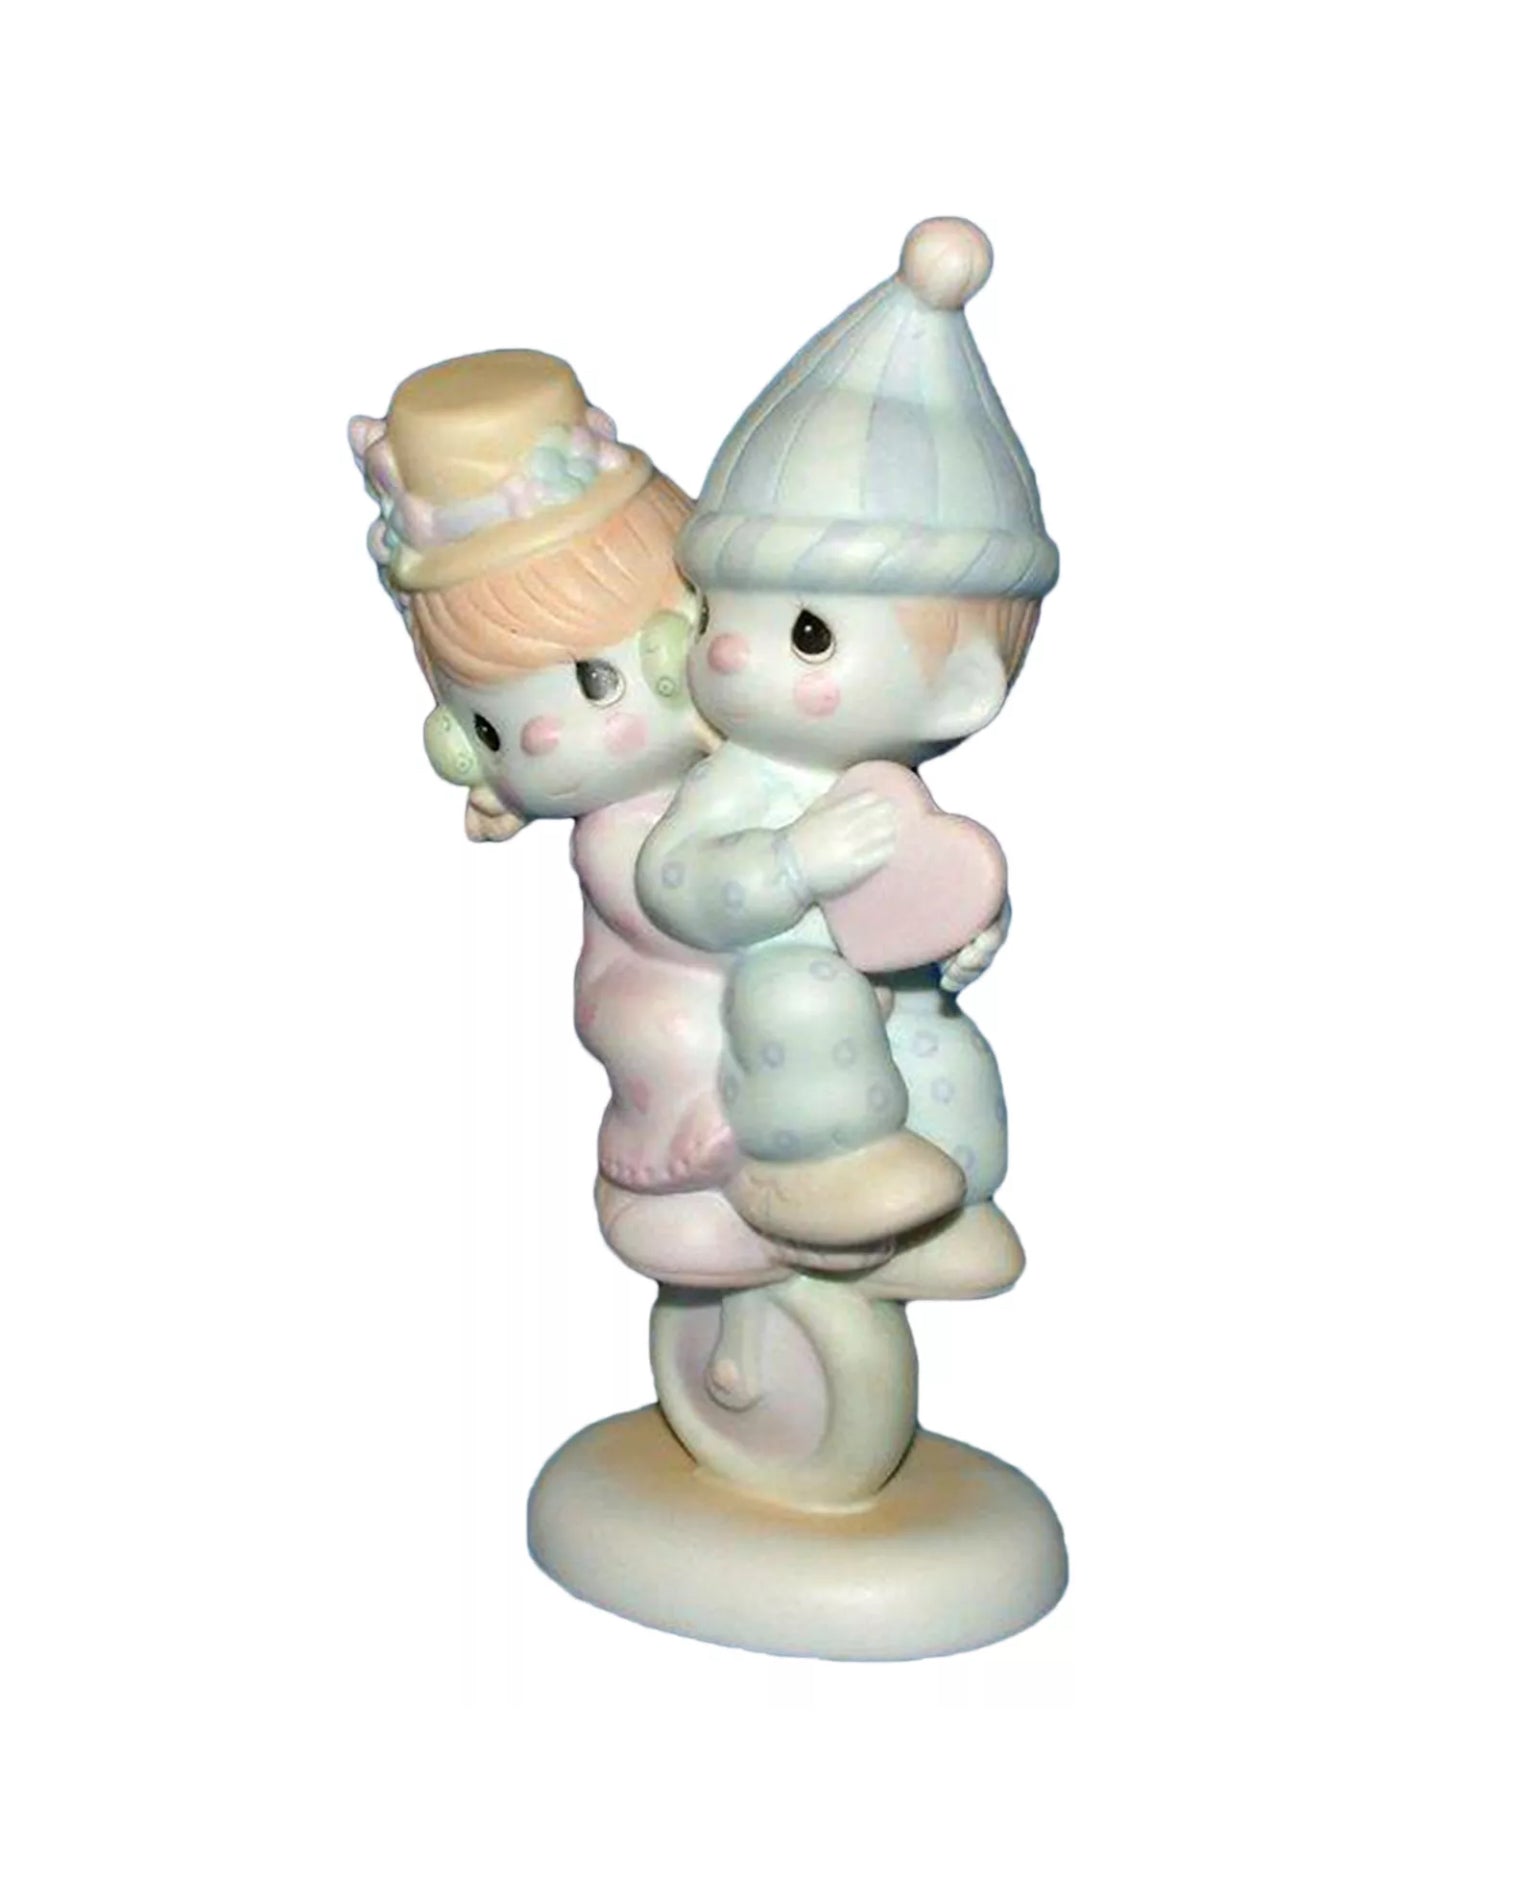 Lord Help Us Keep Our Act Together - Precious Moment Figurine